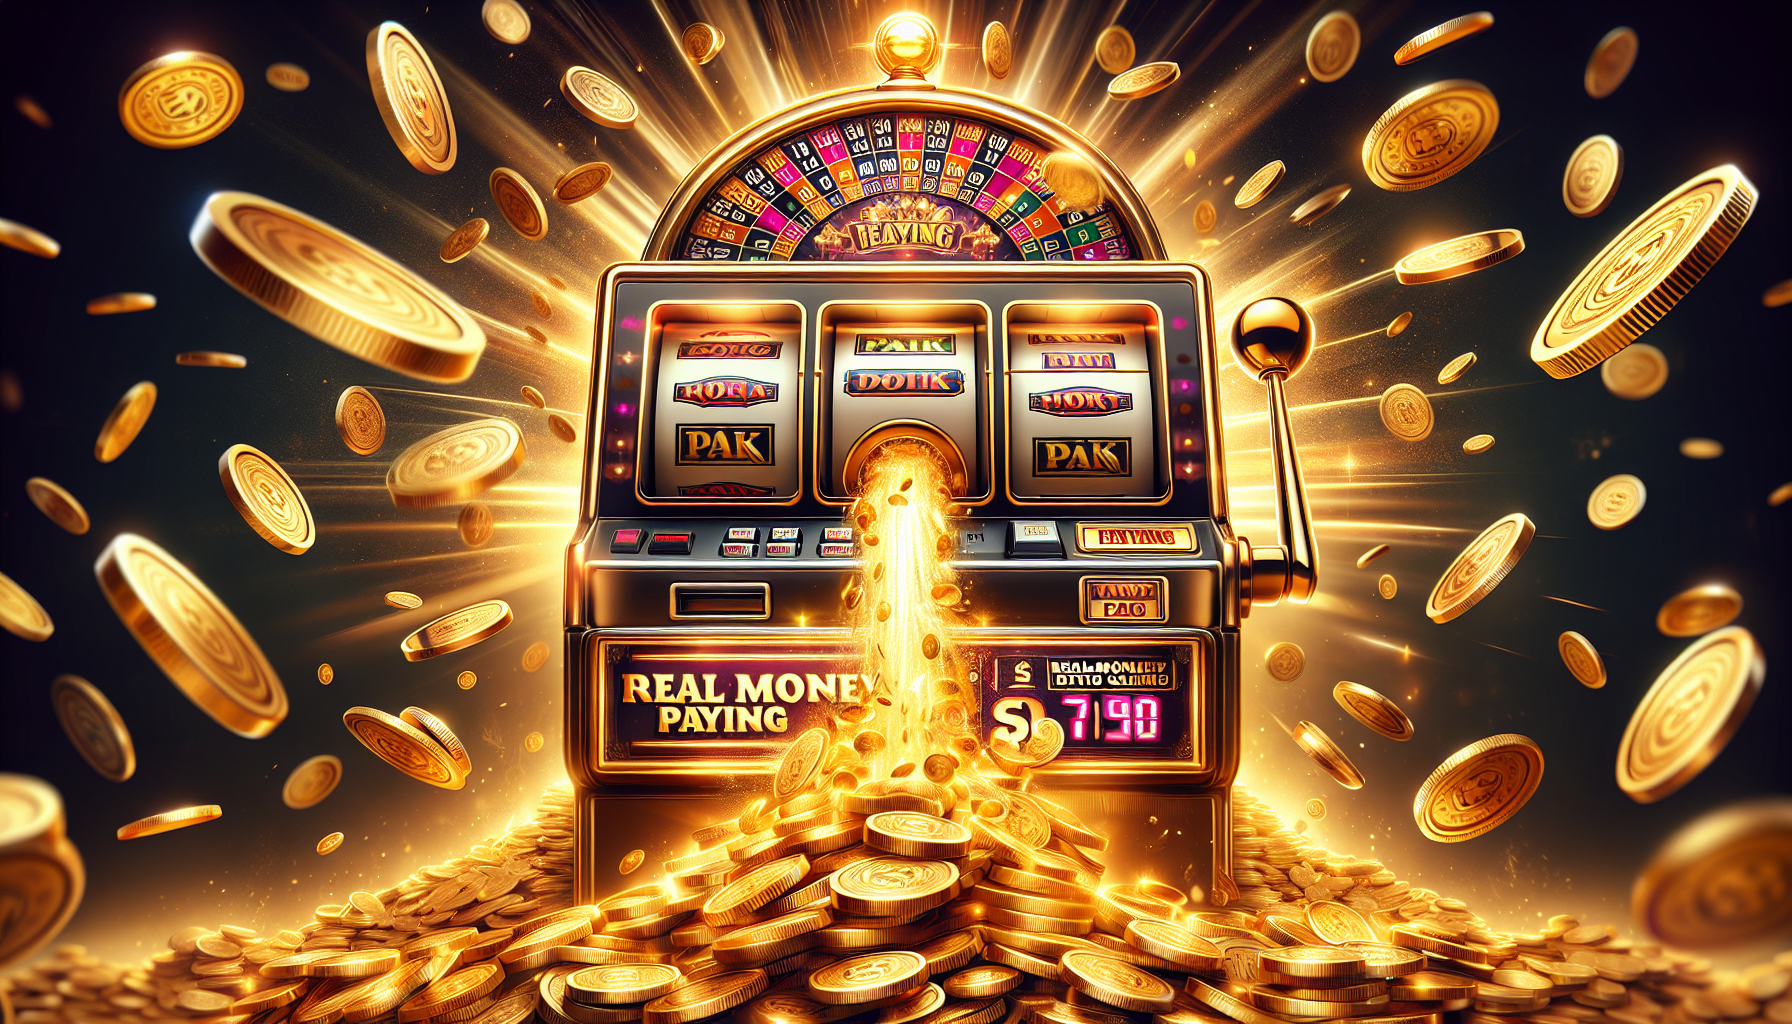 What Slot App Pays Real Money?